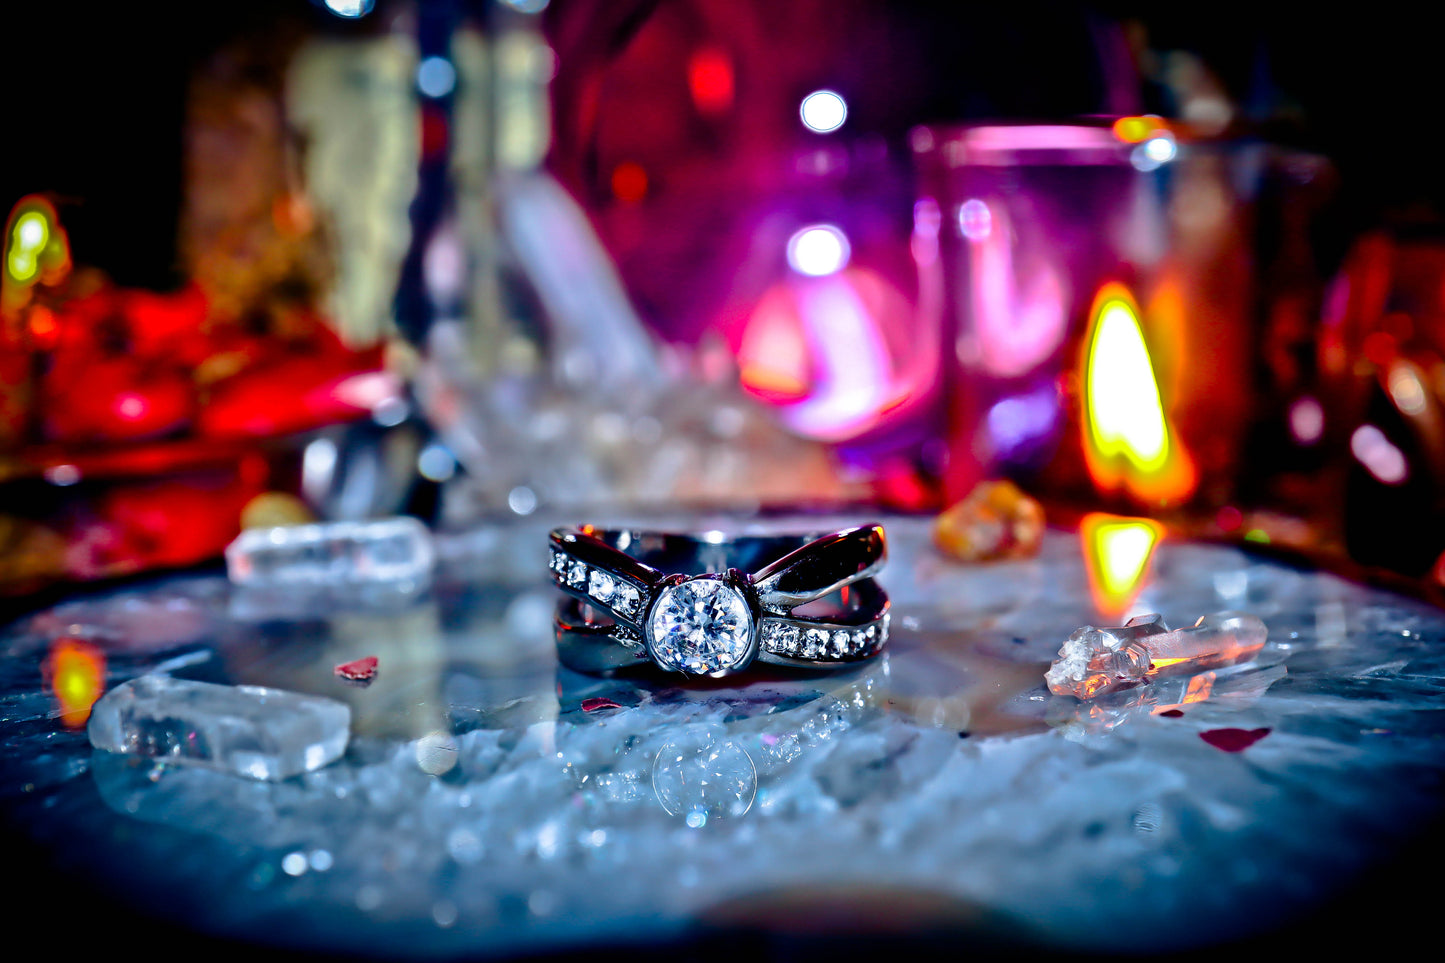 ** TRANSGENDER ** Powerful Centuries Old Transformation Spell! REAL Transgender Hormone Change Your Gender Shapeshifting Beauty Spell Haunted Ring! One of a Kind!